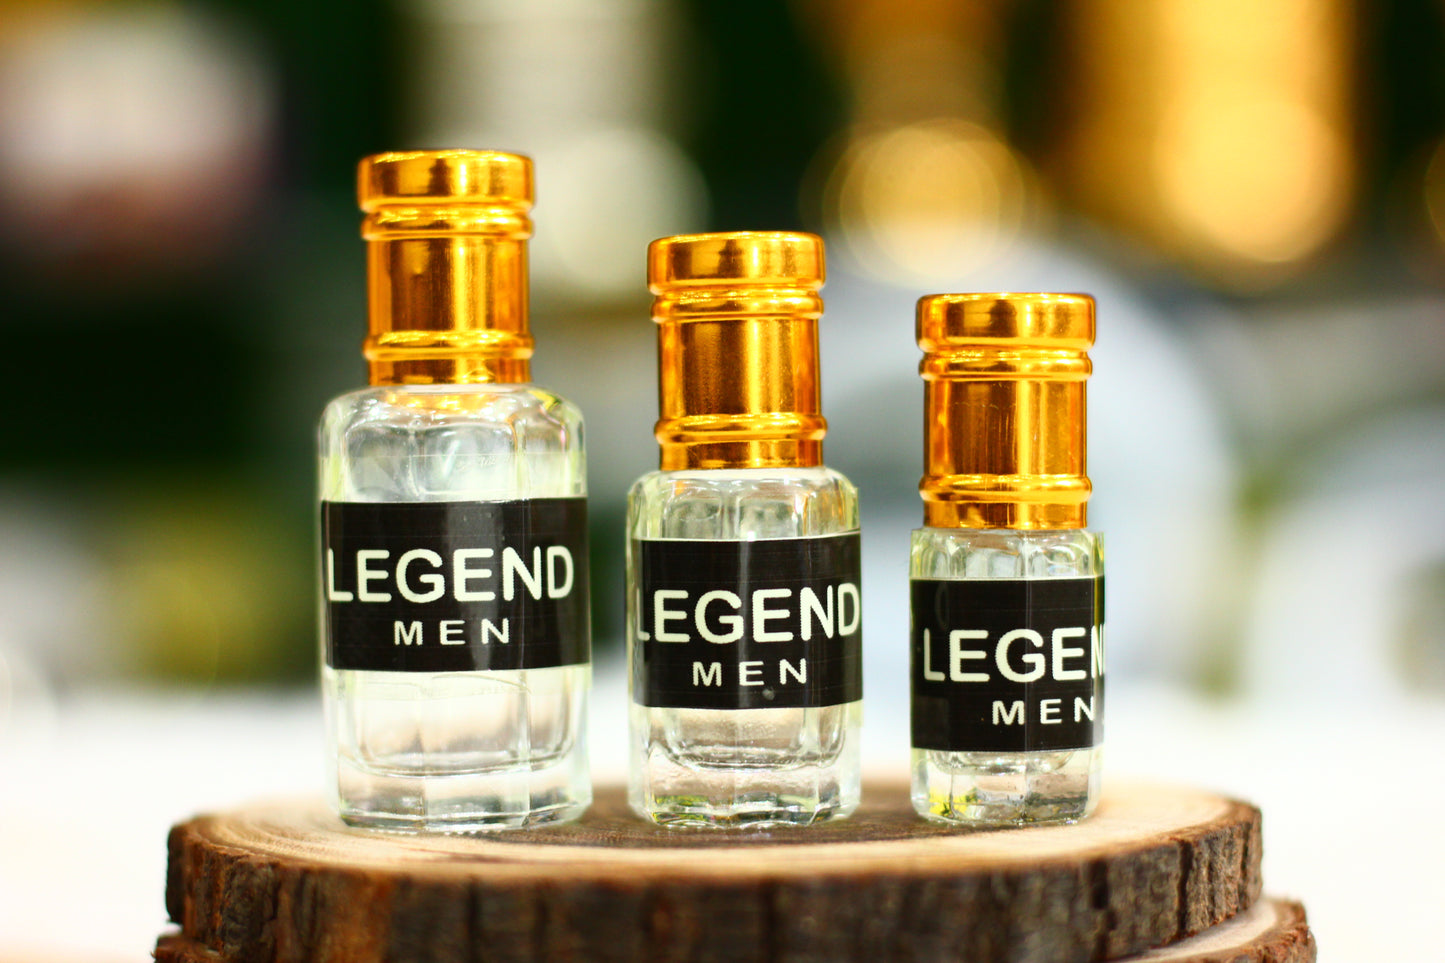 Legend Men Attar - A Powerful and Sophisticated Fragrance